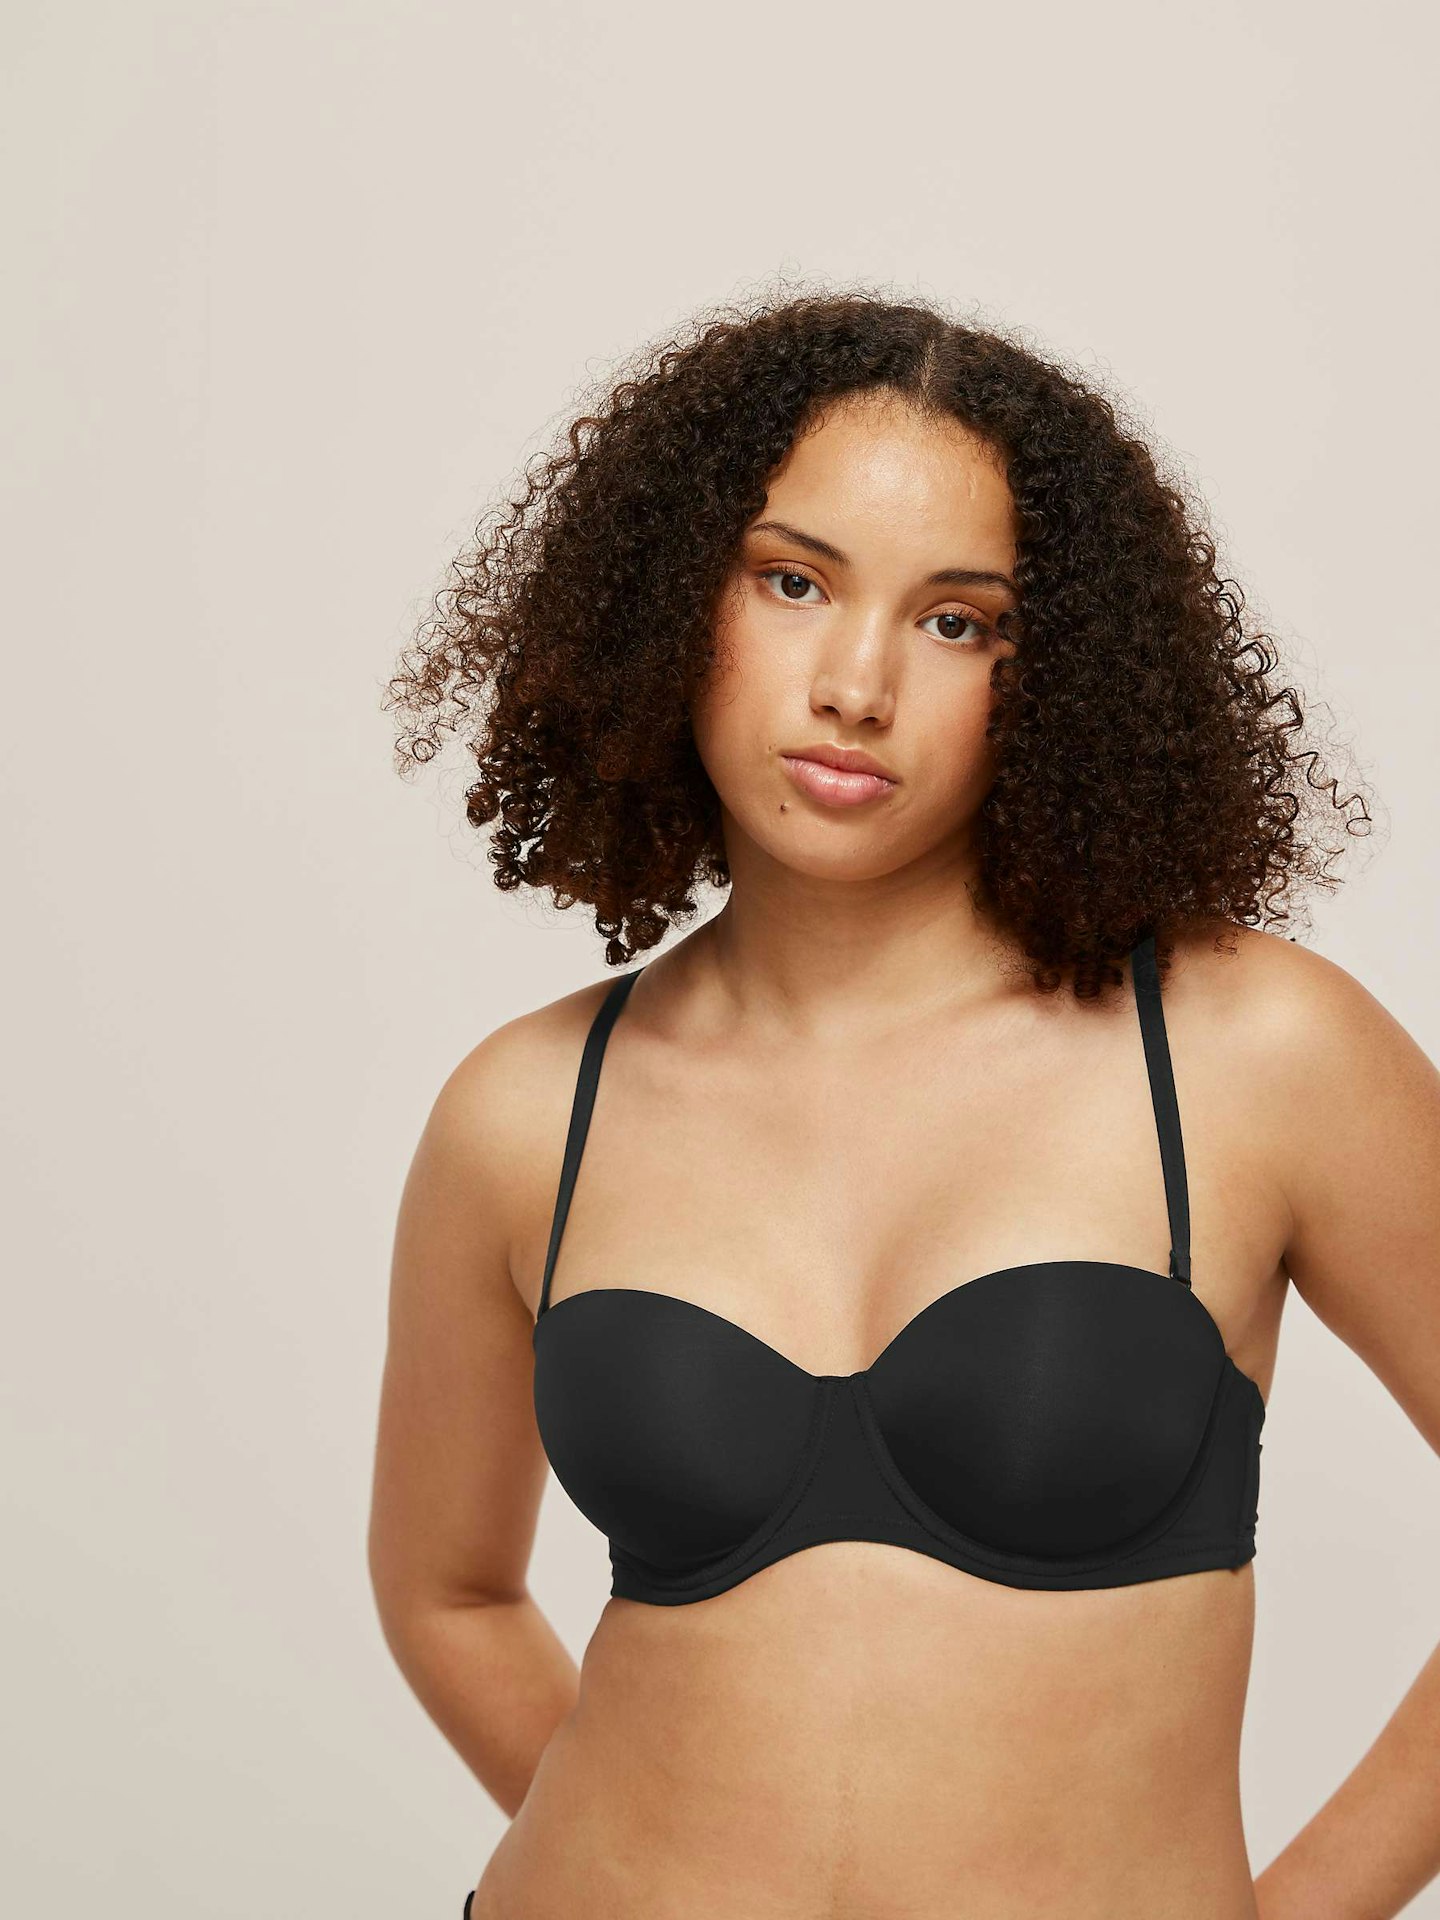 how to find the best bra John Lewis & Partners, Jessica Multiway Bra Sizes D-F, £20